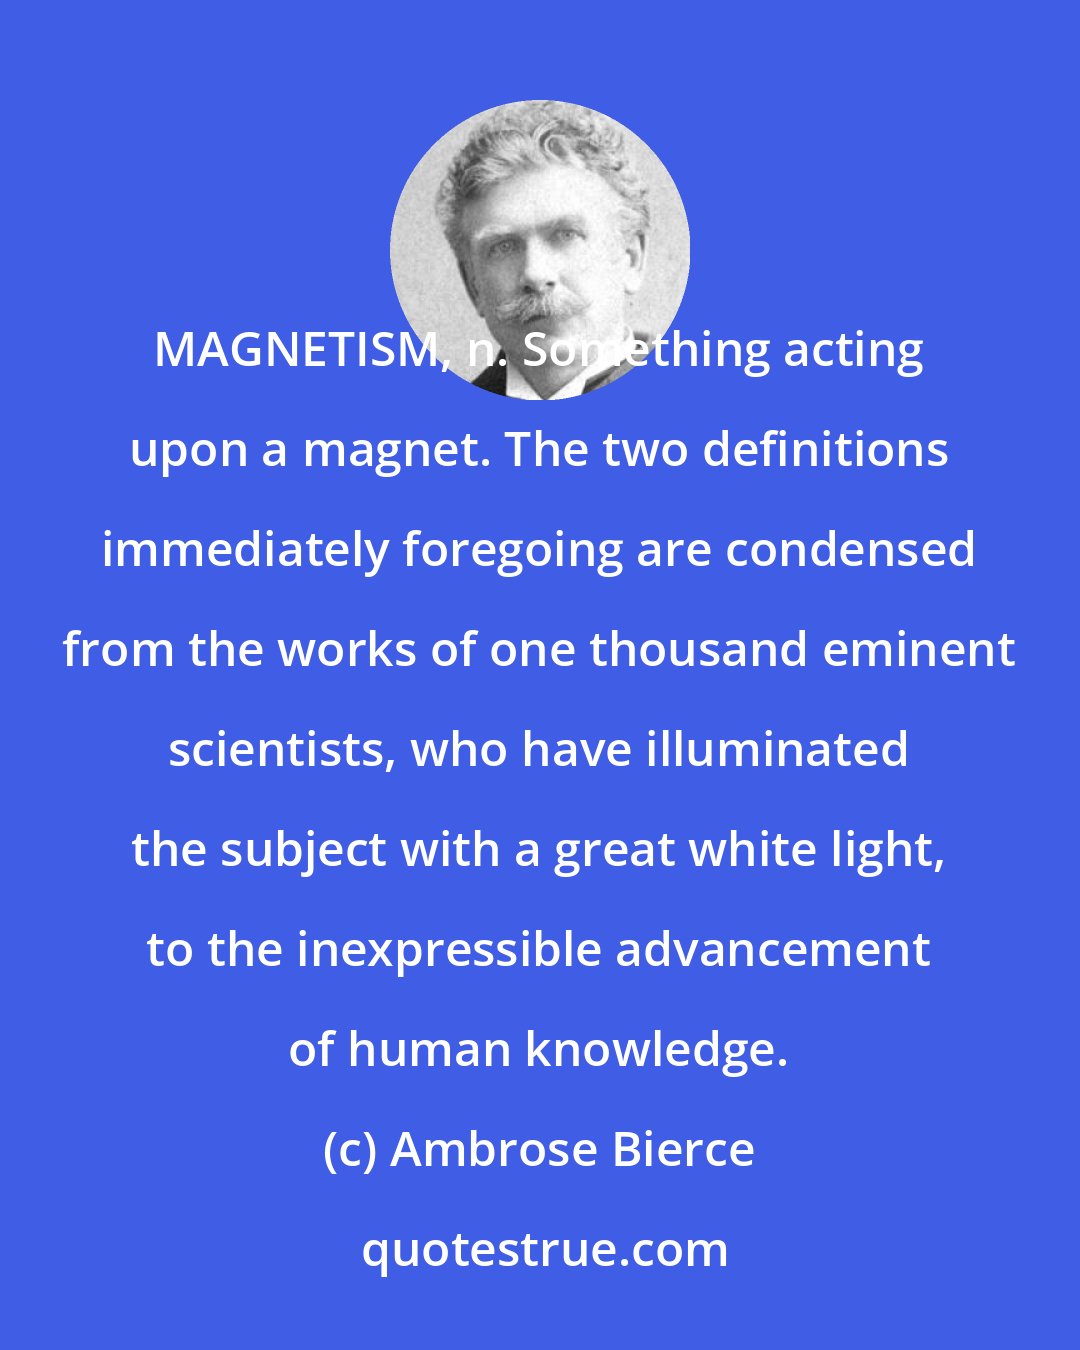 Ambrose Bierce: MAGNETISM, n. Something acting upon a magnet. The two definitions immediately foregoing are condensed from the works of one thousand eminent scientists, who have illuminated the subject with a great white light, to the inexpressible advancement of human knowledge.